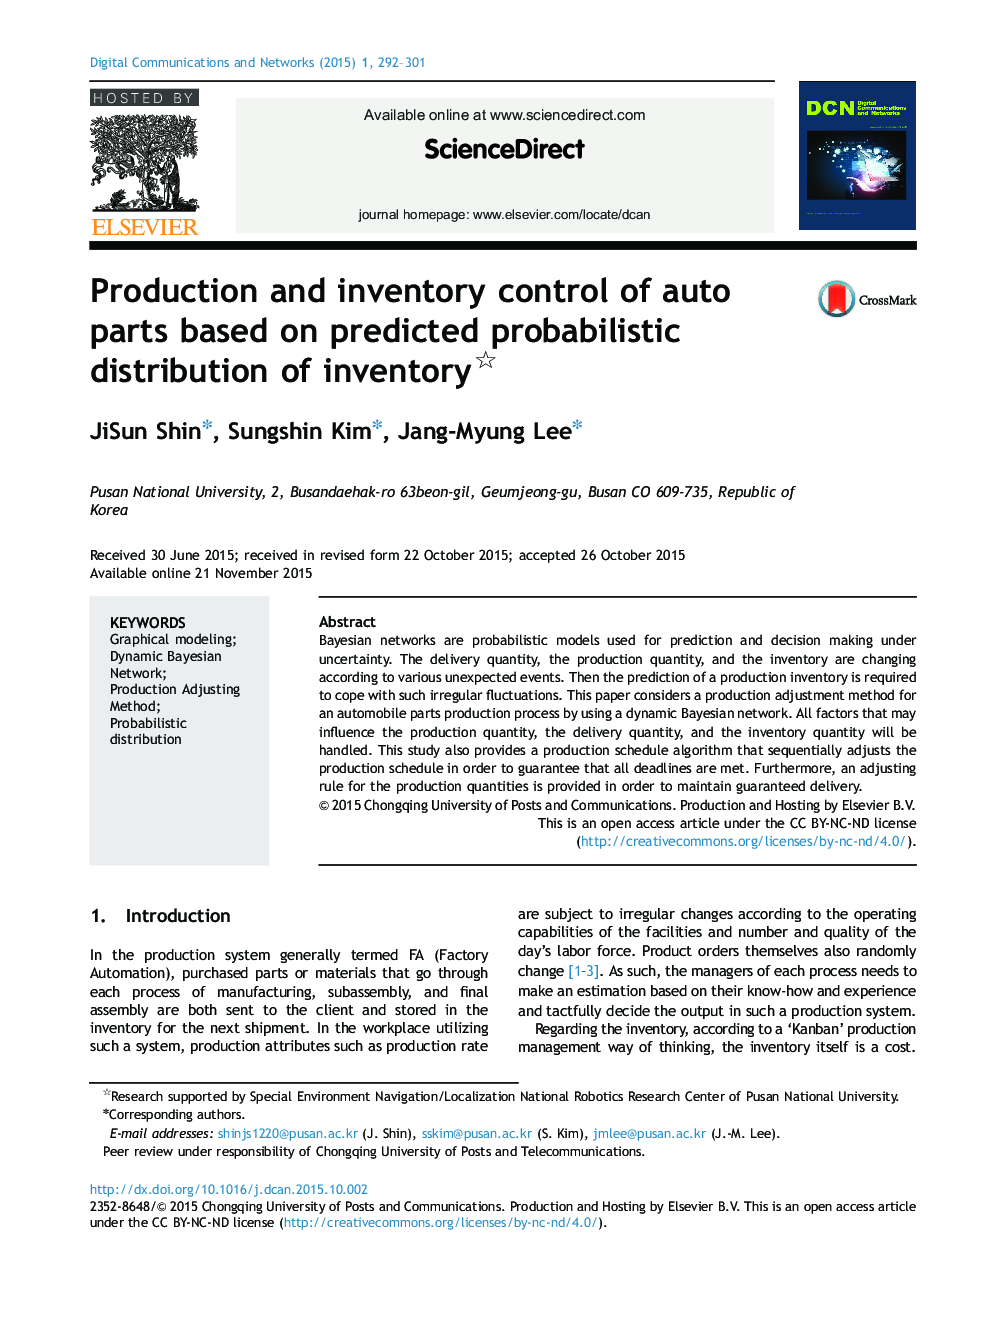 Production and inventory control of auto parts based on predicted probabilistic distribution of inventory 